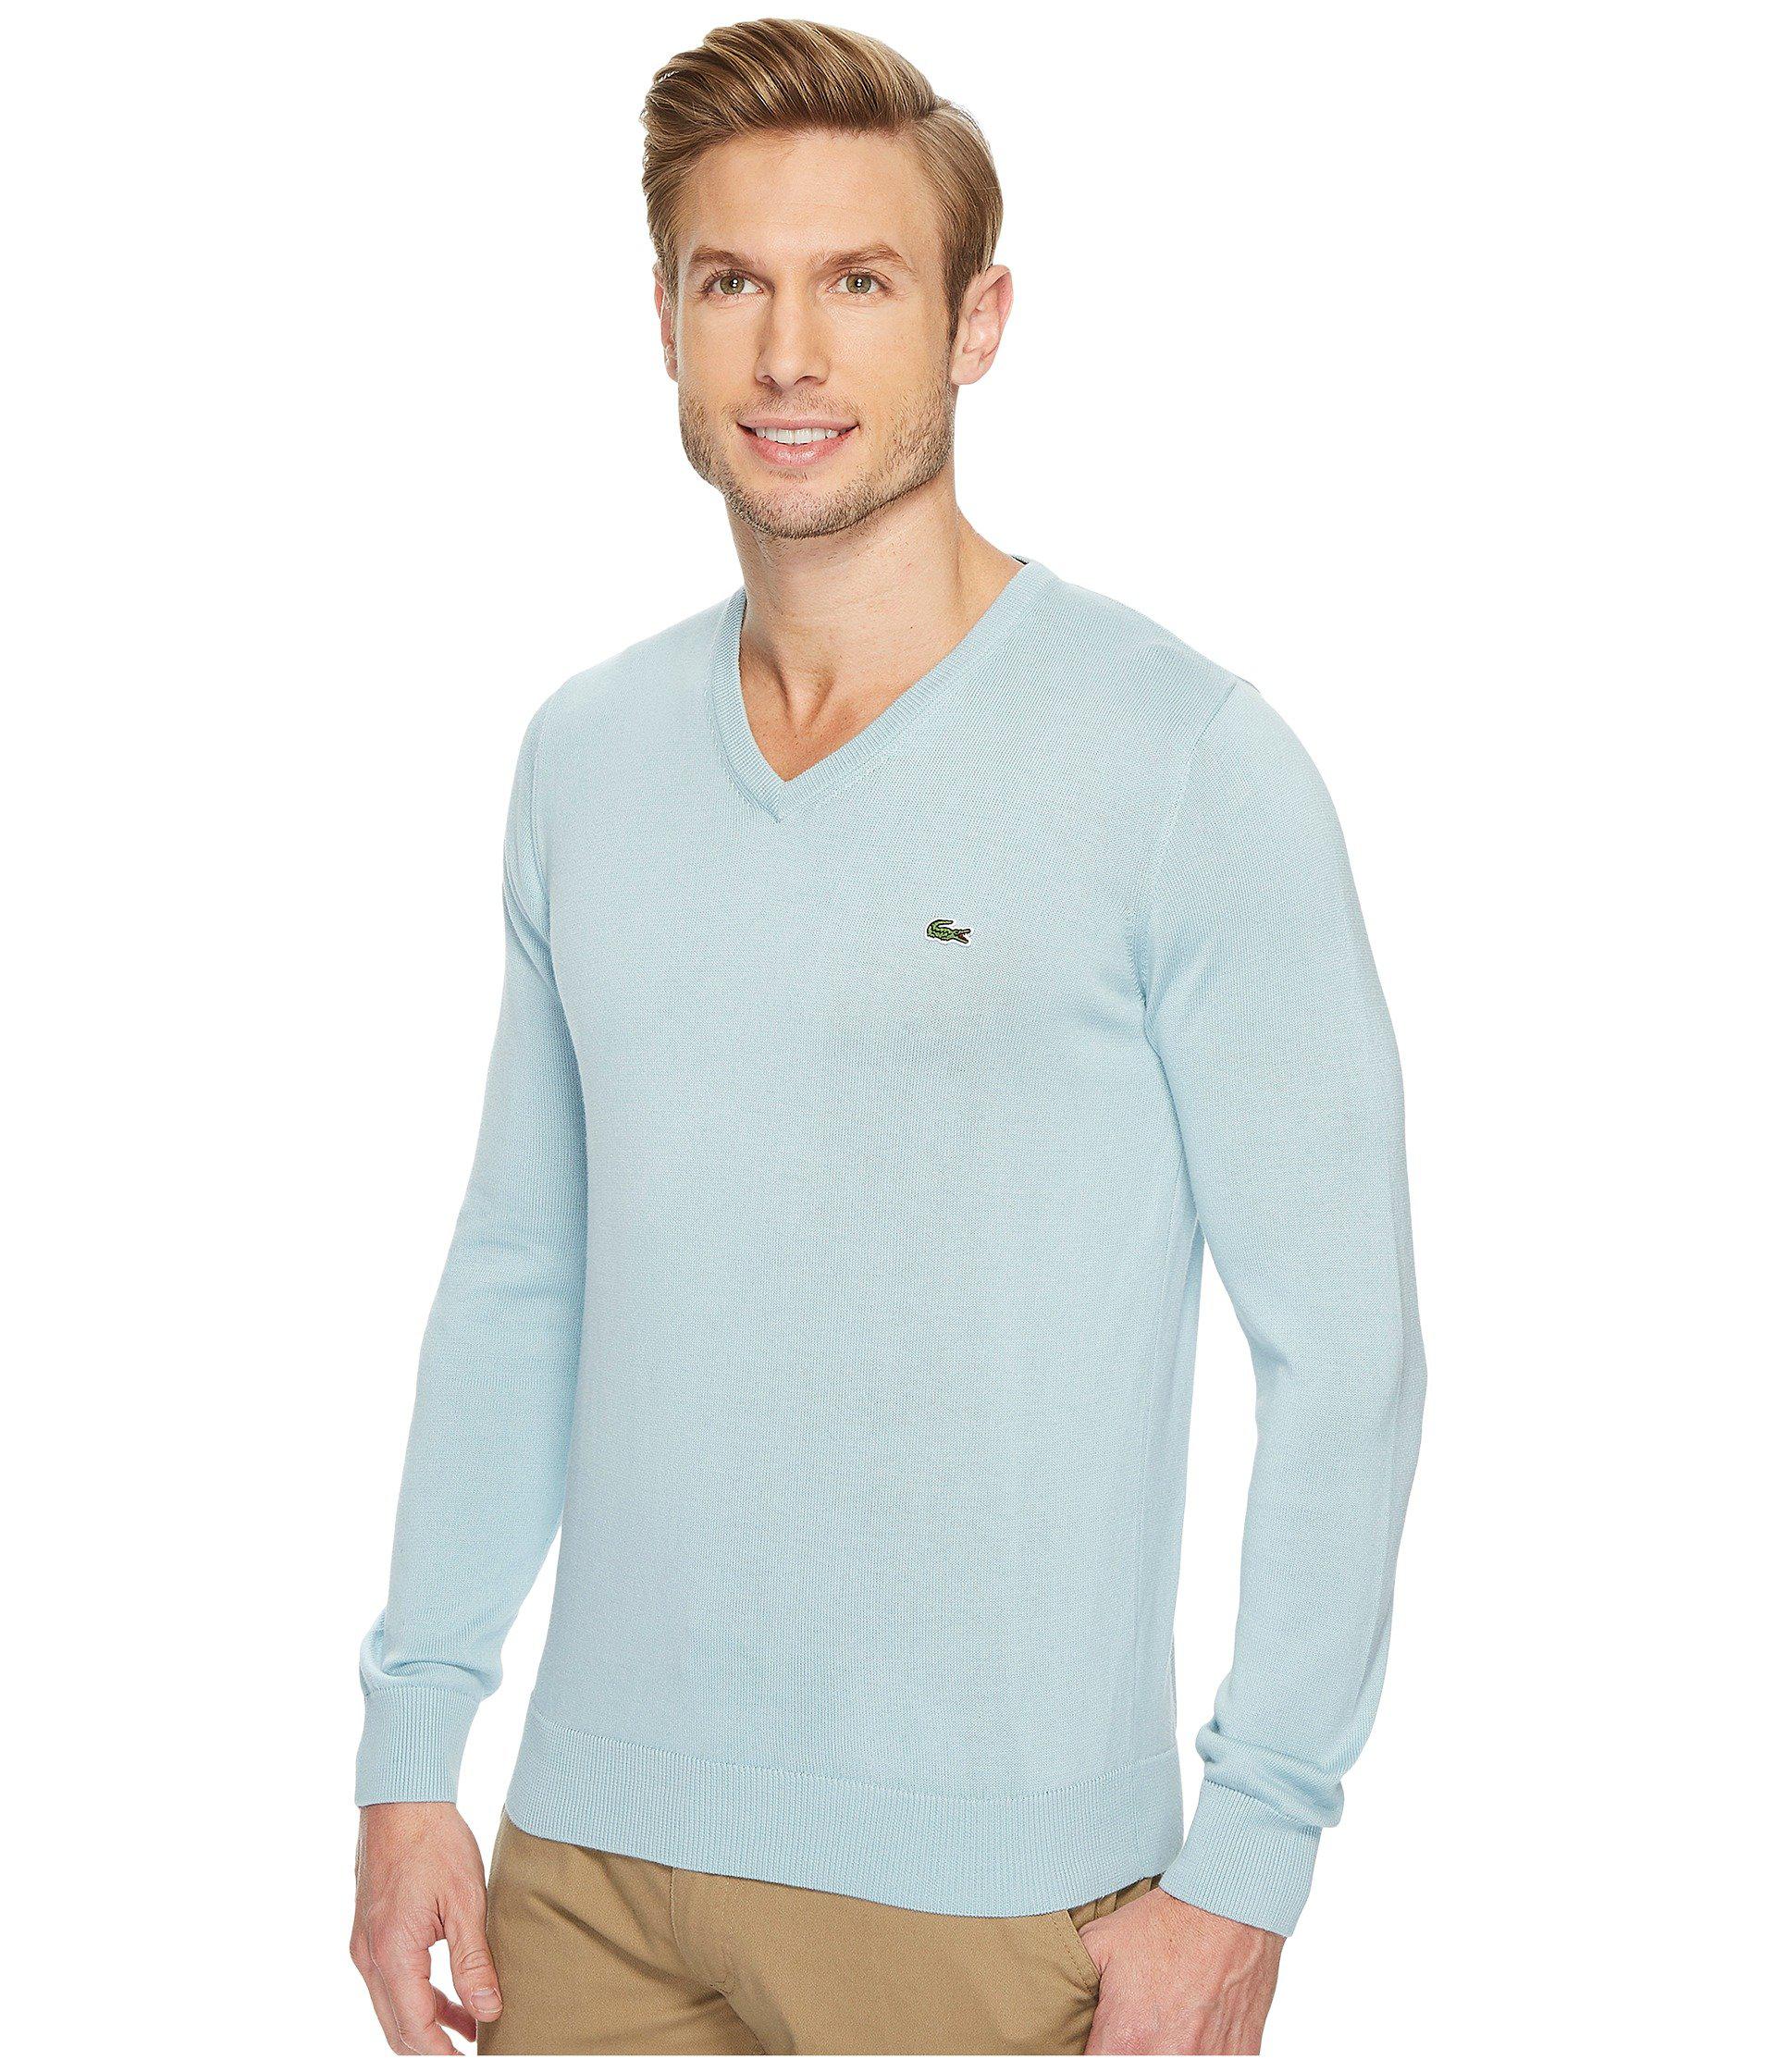 Lacoste V-neck Cotton Jersey Sweater With Green Croc in Blue for Men - Lyst